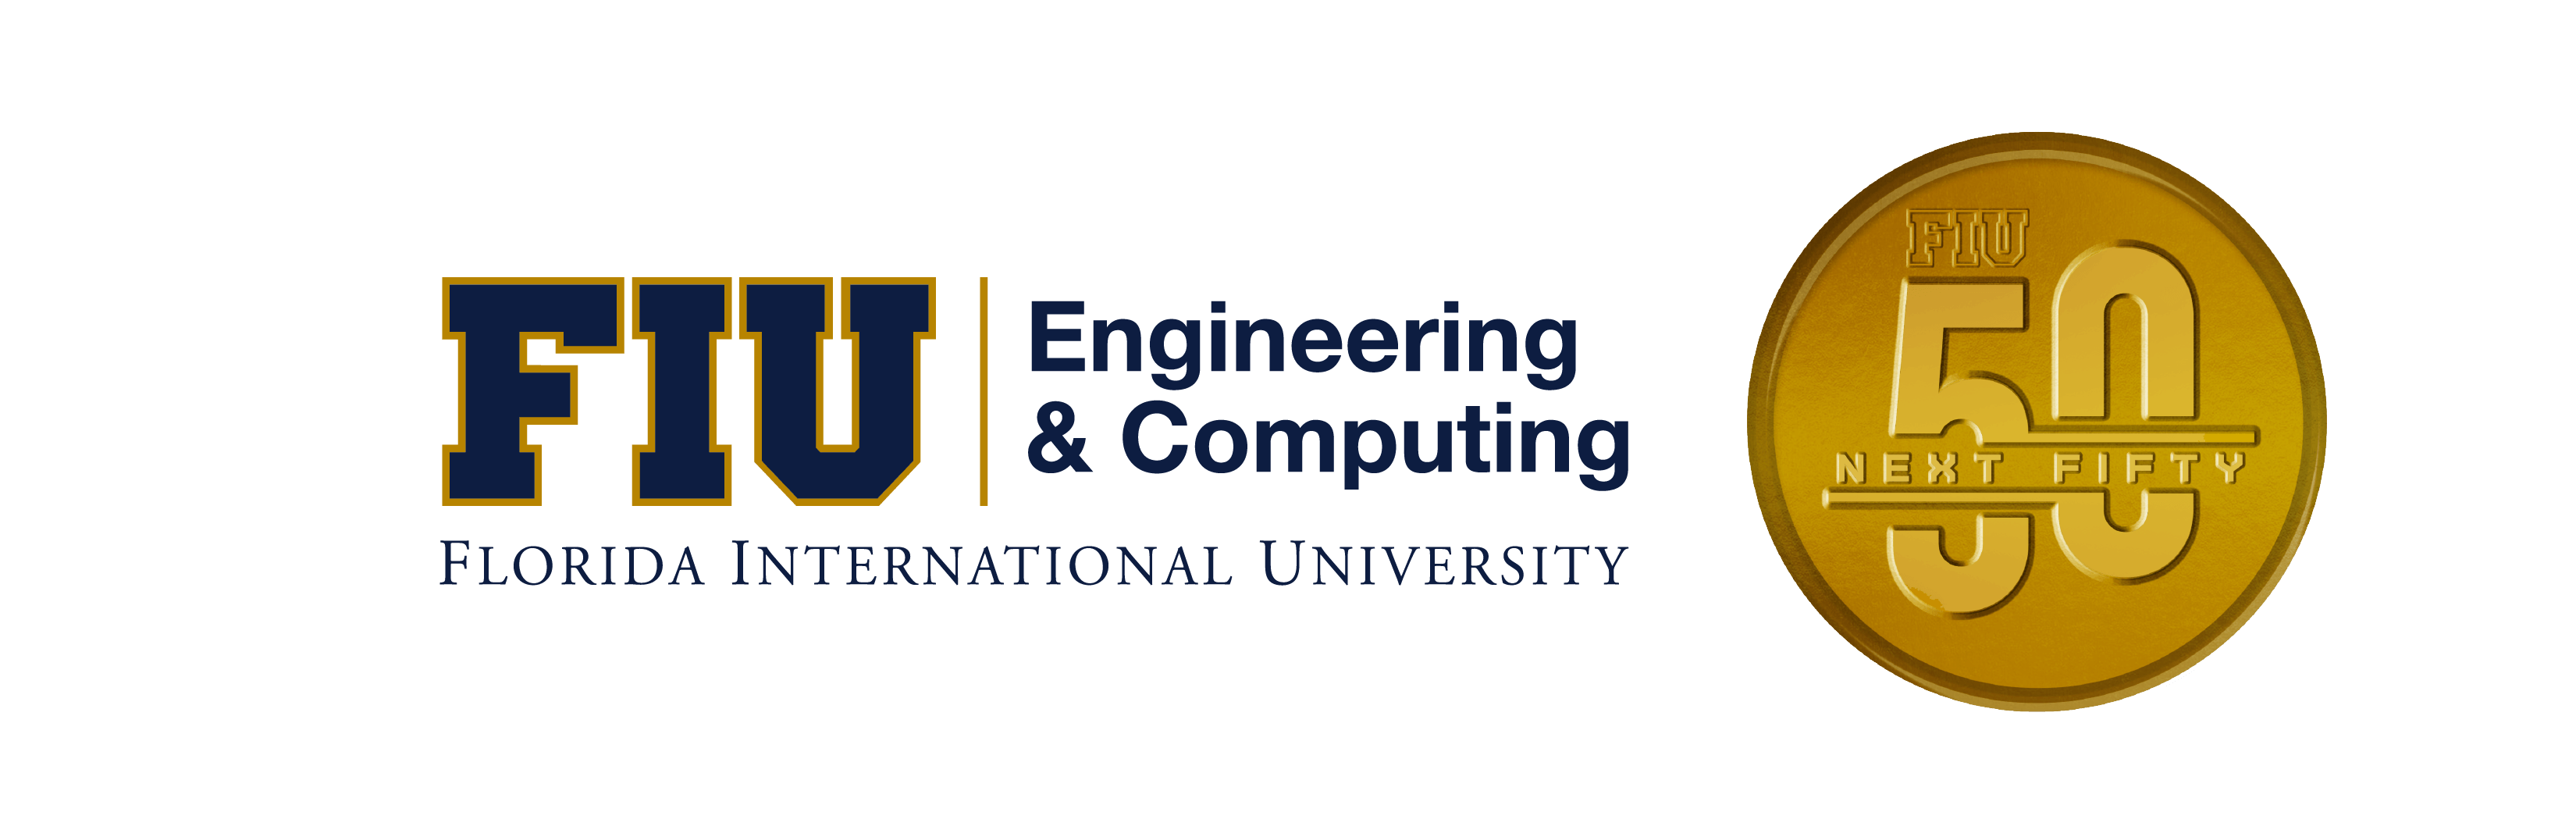 FIU Engineering & Computing logo with the Next Fifty medal